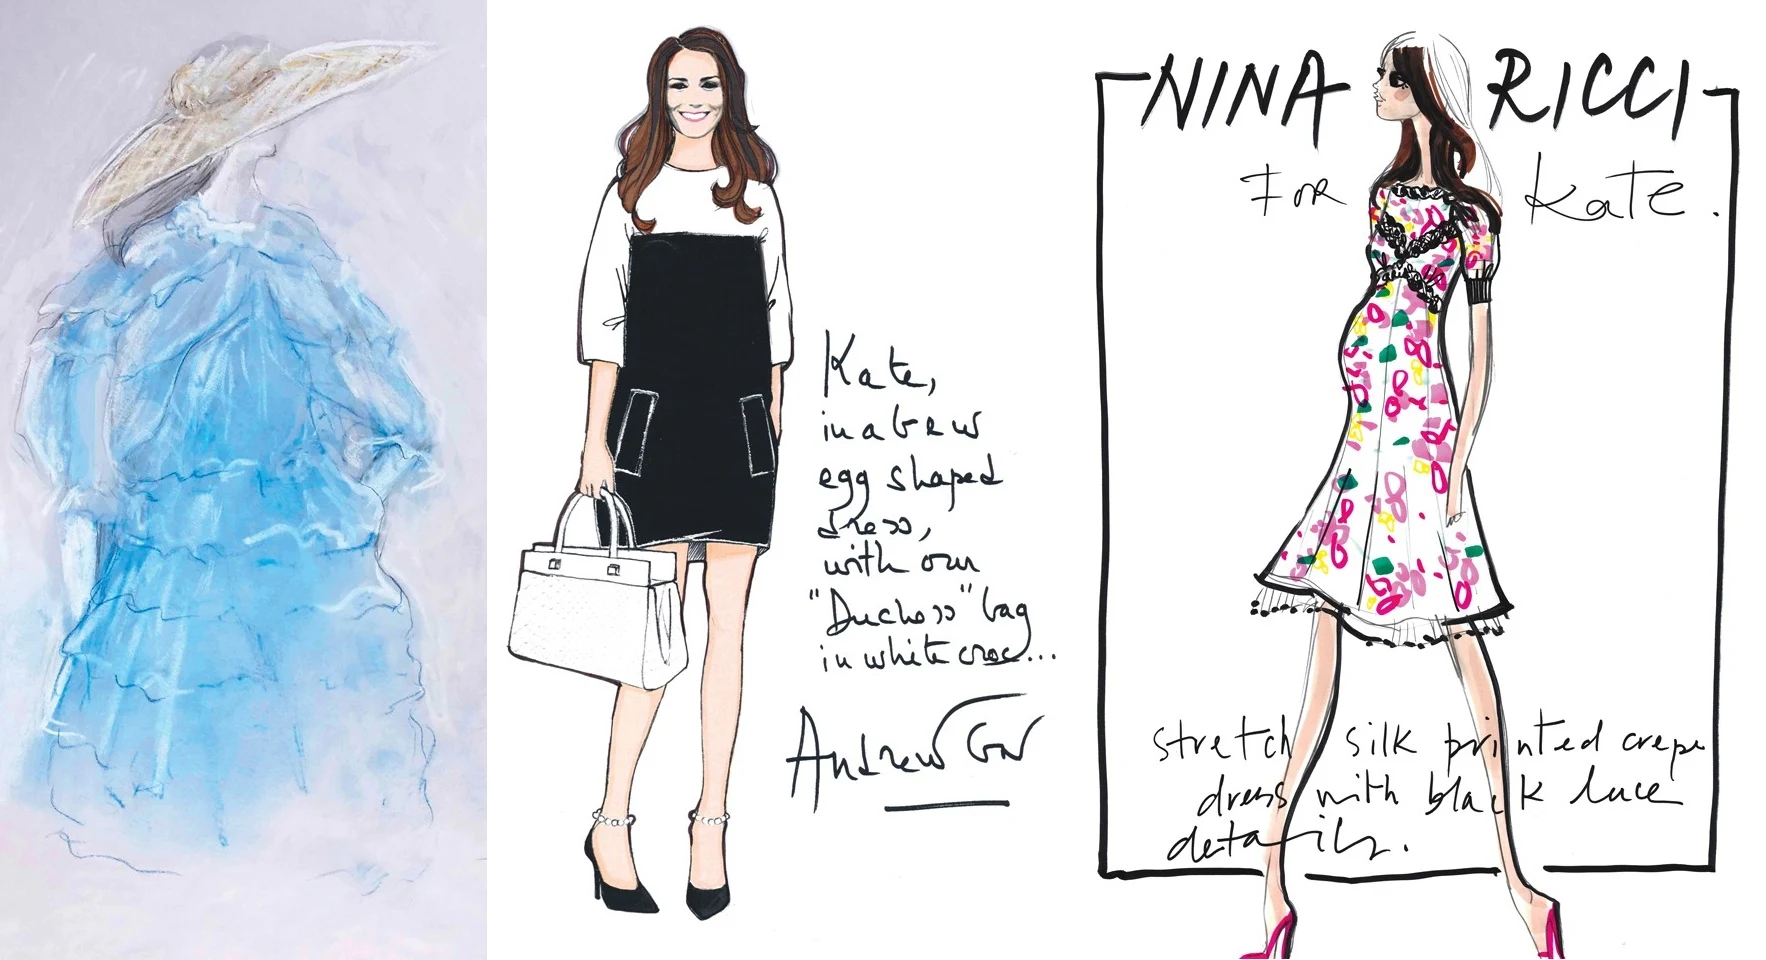 Lorry Newhouse, Andrew Gn & Nina Ricci Courtesy Images via Women's Wear Daily